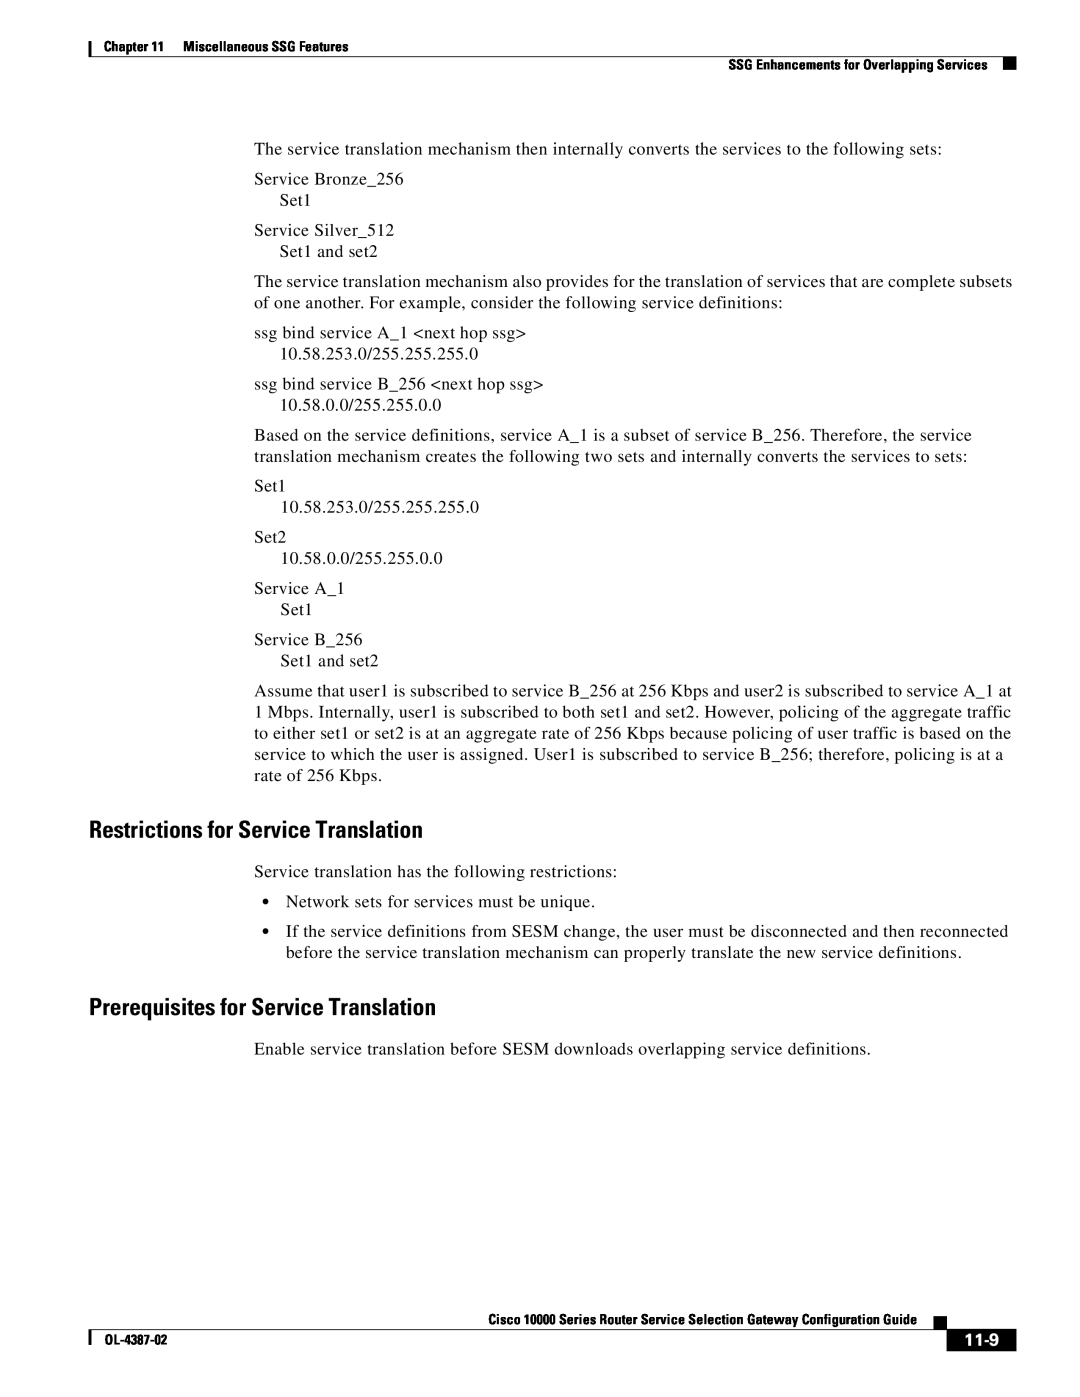 Cisco Systems OL-4387-02 manual Restrictions for Service Translation, Prerequisites for Service Translation, 11-9 